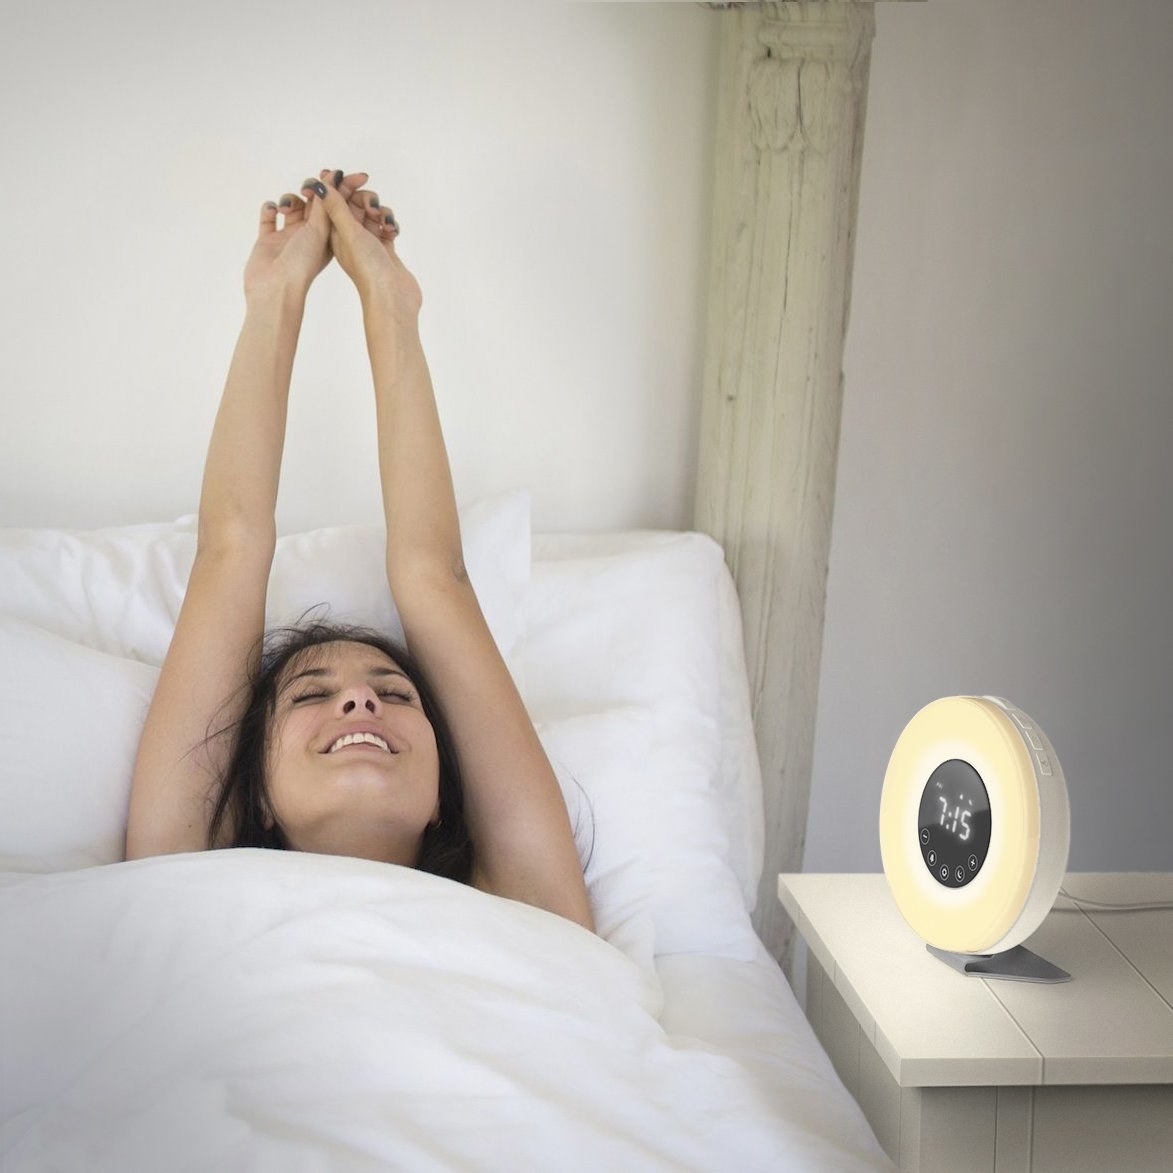 The circular alarm clock with an outer ring of light and inner black circle with the time on it sitting on a bedside table with a model in bed next to it stretching their arms